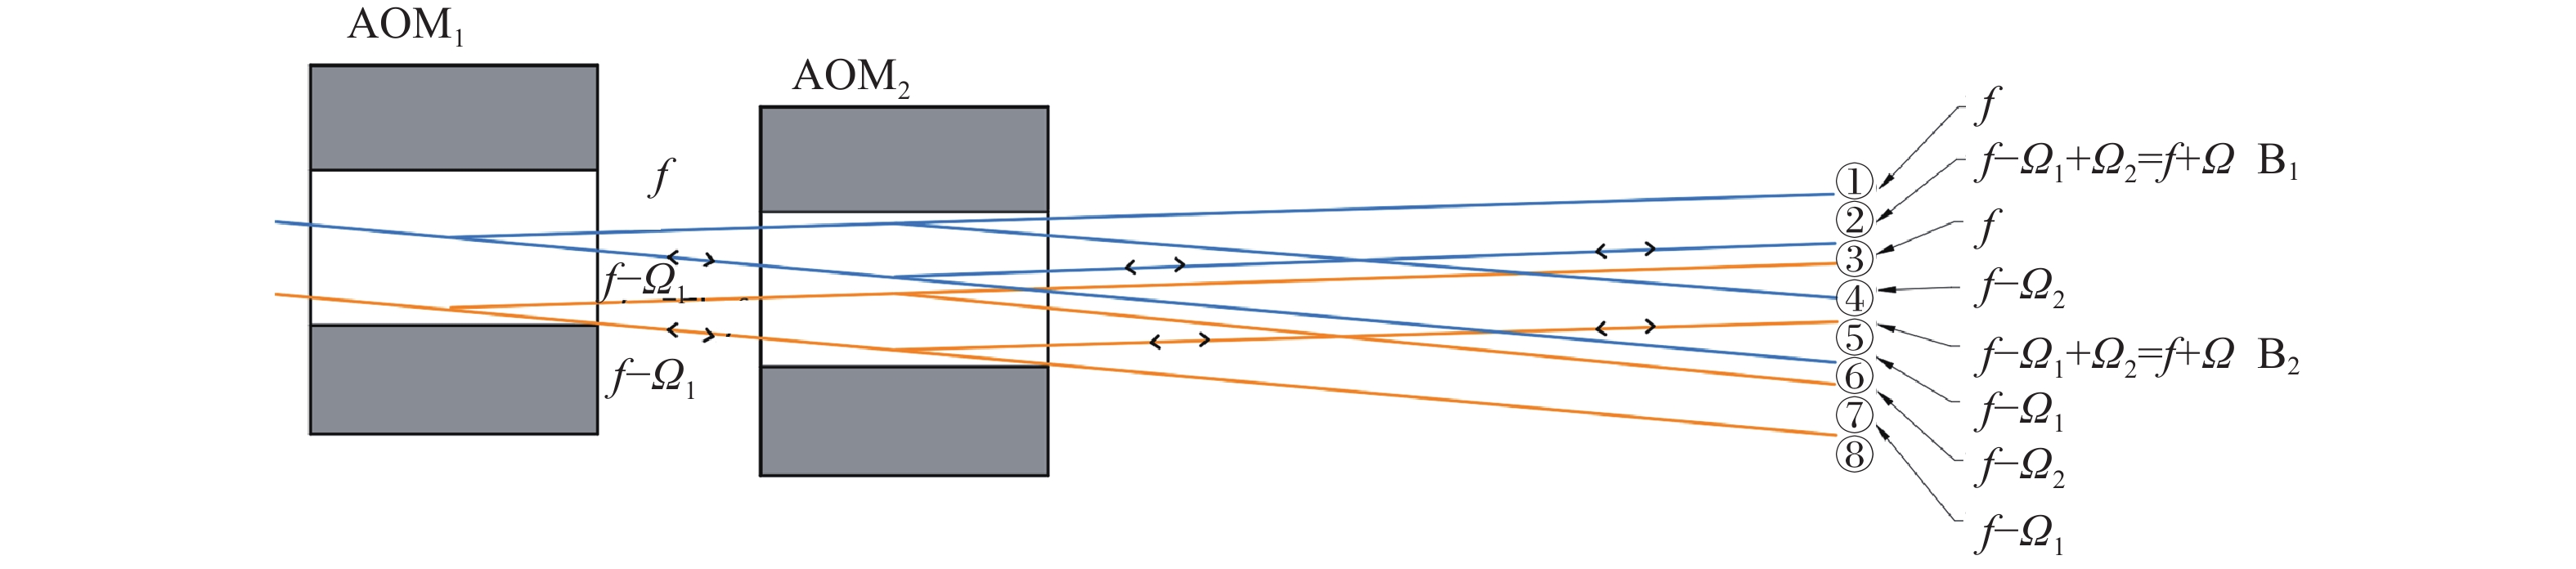 Schematic diagram of optical path for differential frequency shift of acousto-optic modulators. ①~⑧: Eight output laser beams